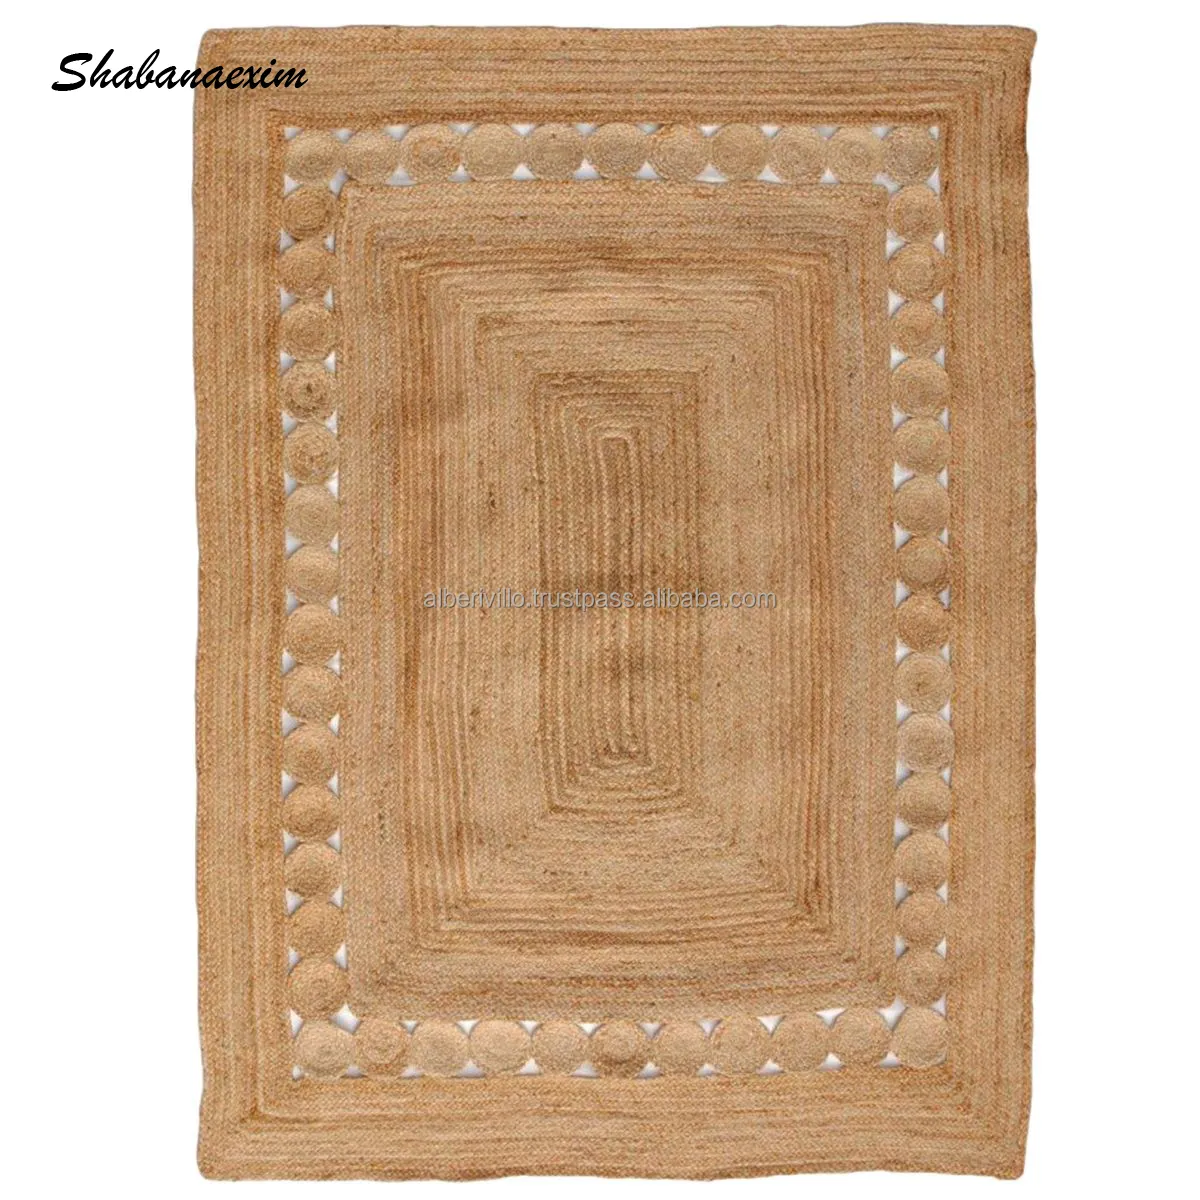 Wholesale Braided Jute Rug Eco- Friendly Jute Rug Handmade Jute Area Carpet for Kitchen, Bedroom India Embroidered Rugs in Bulk